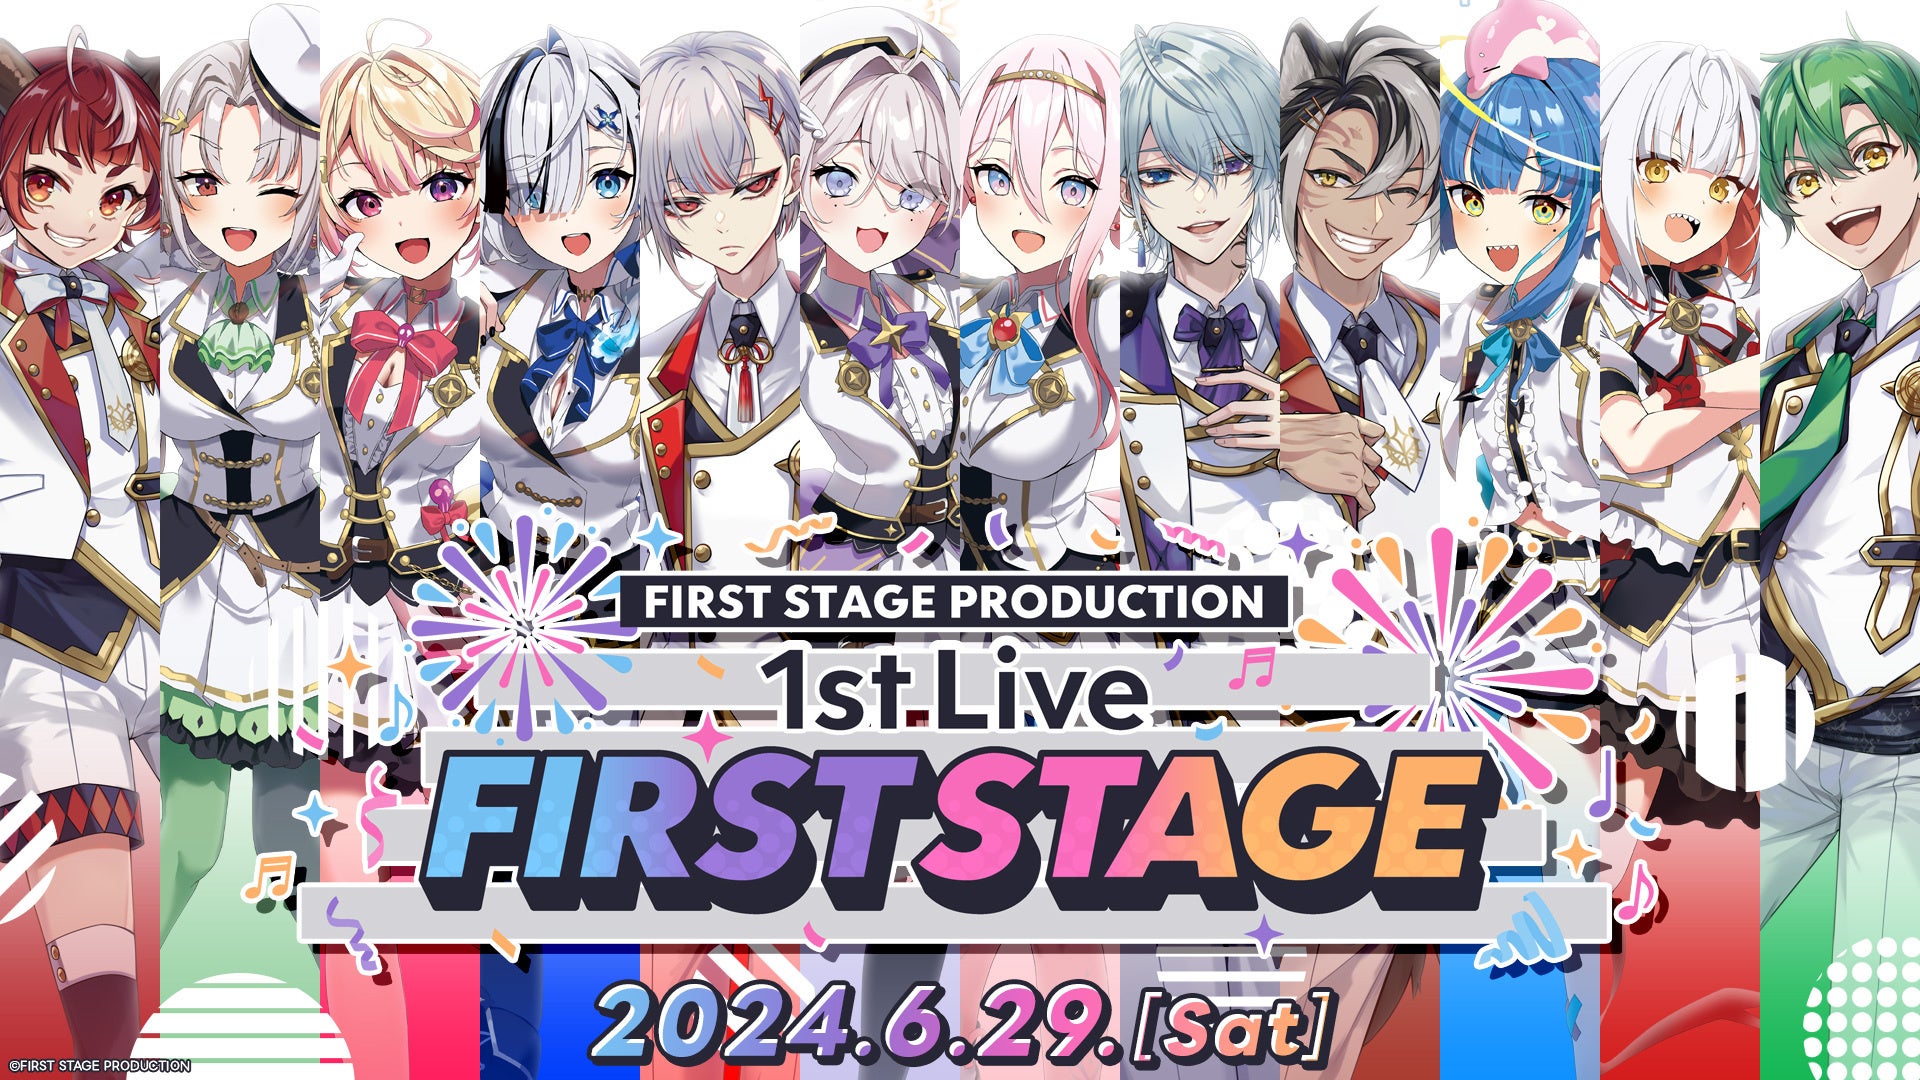 VTuber事務所「FIRST STAGE PRODUCTION」初の単独リアルイベントを6月29日（土）に開催！